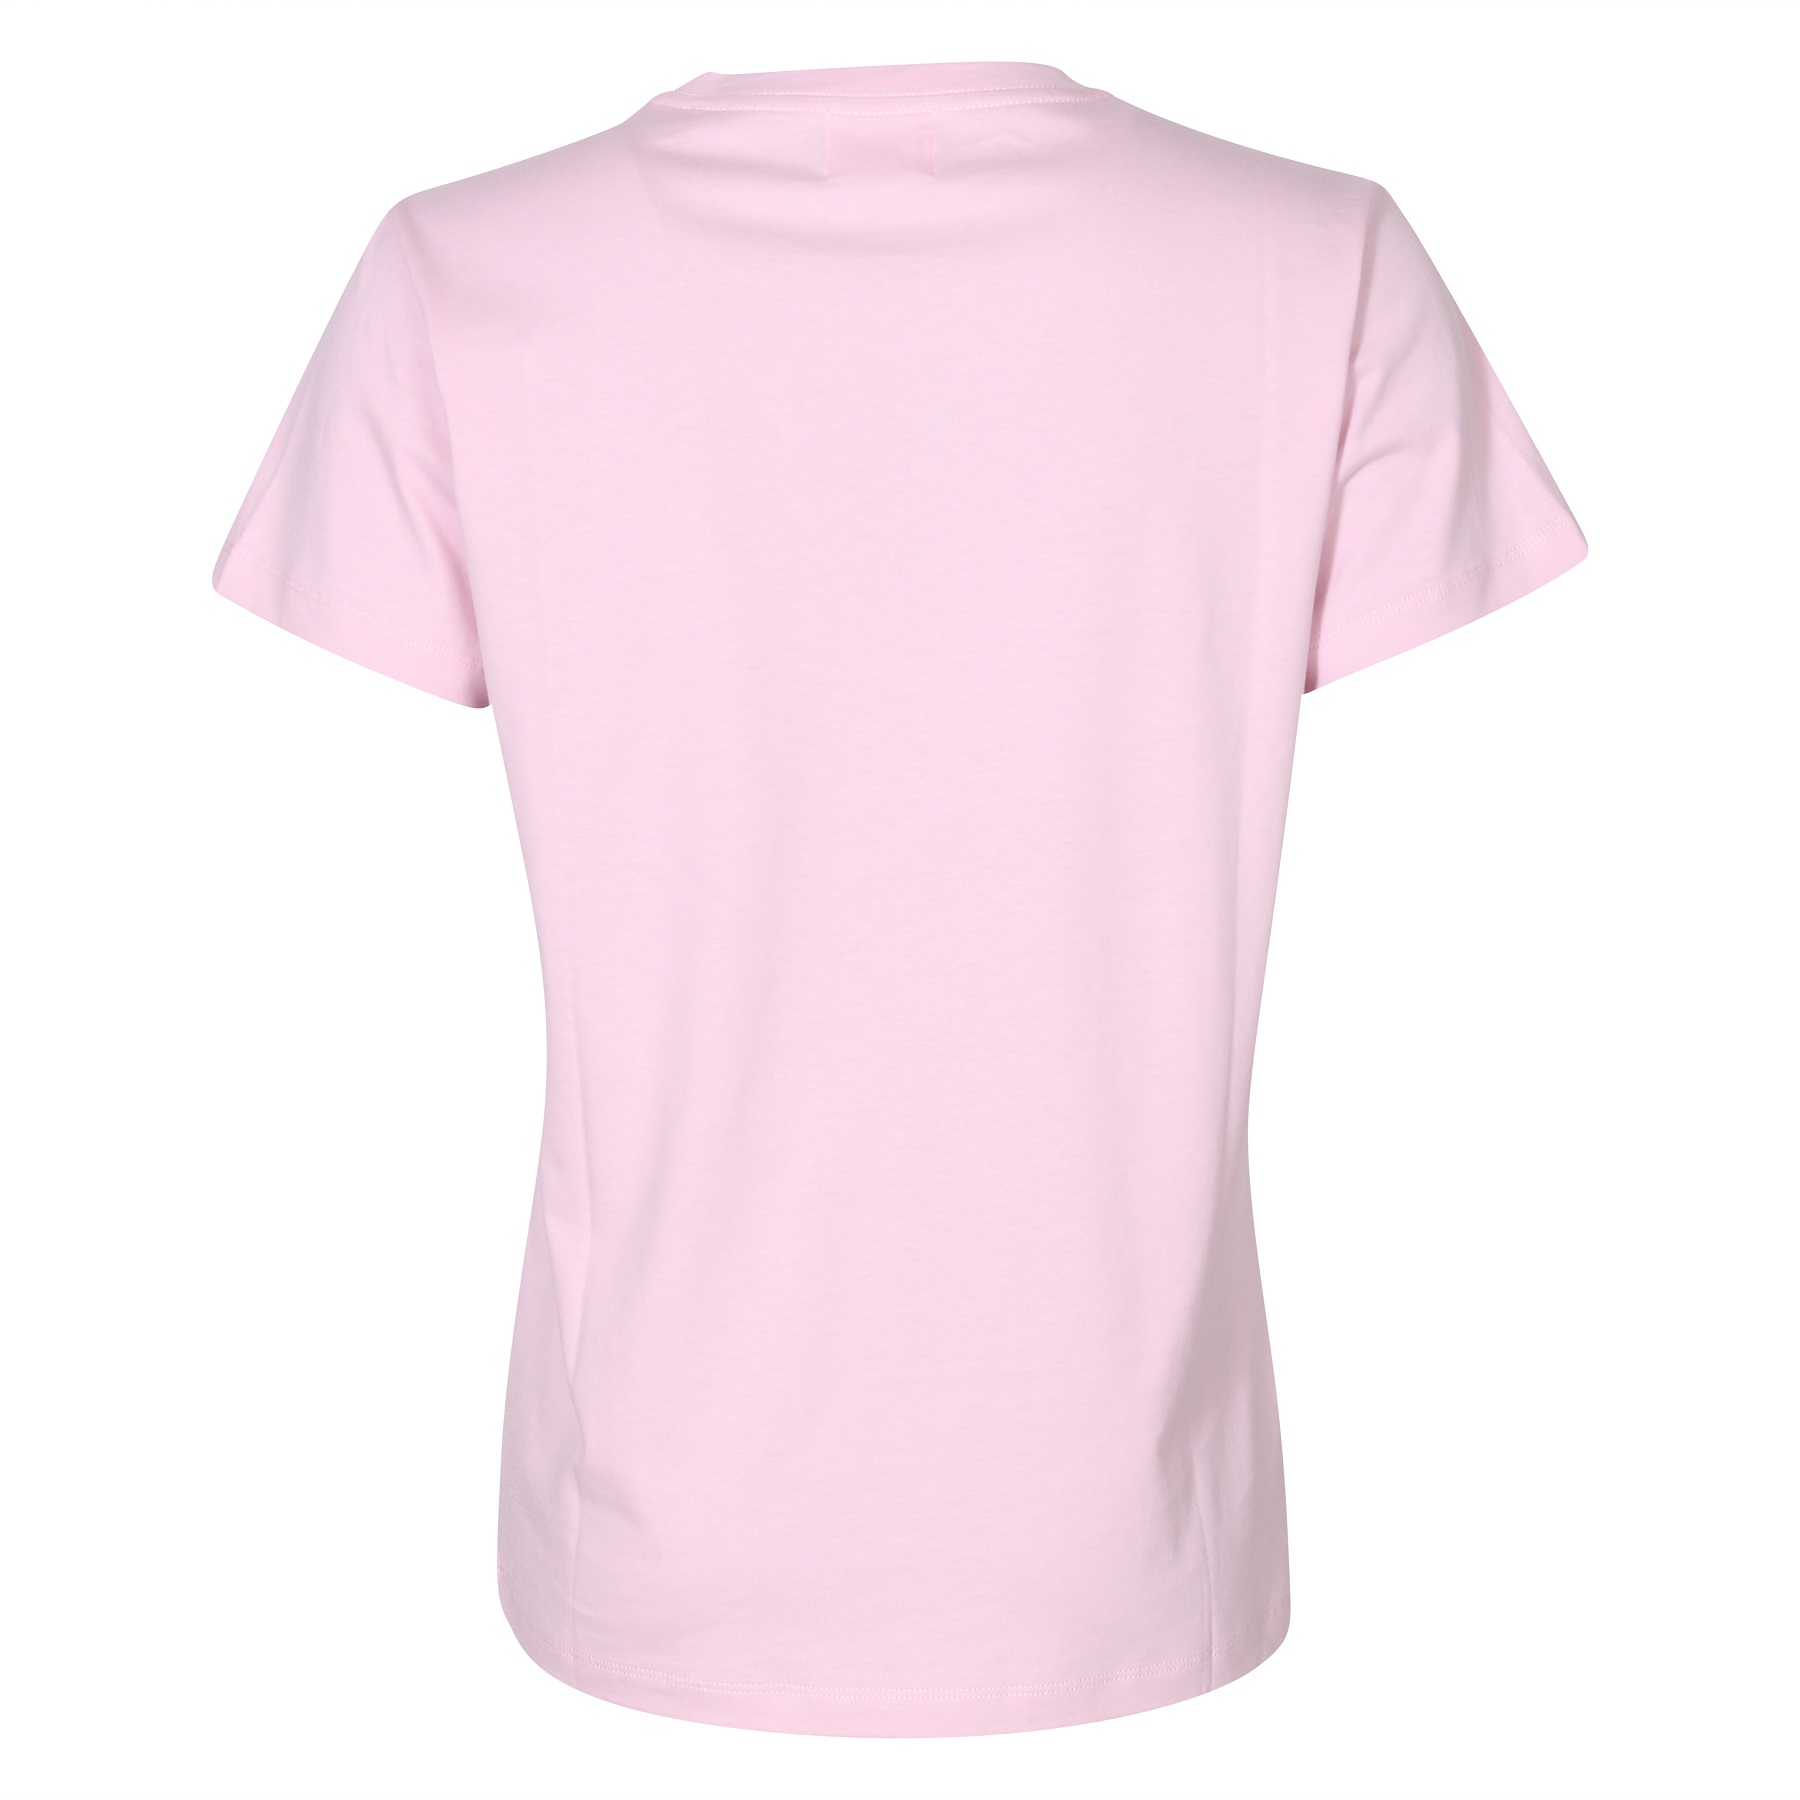 ISABEL MARANT ÉTOILE Aby Logo T-Shirt in Light Pink XS